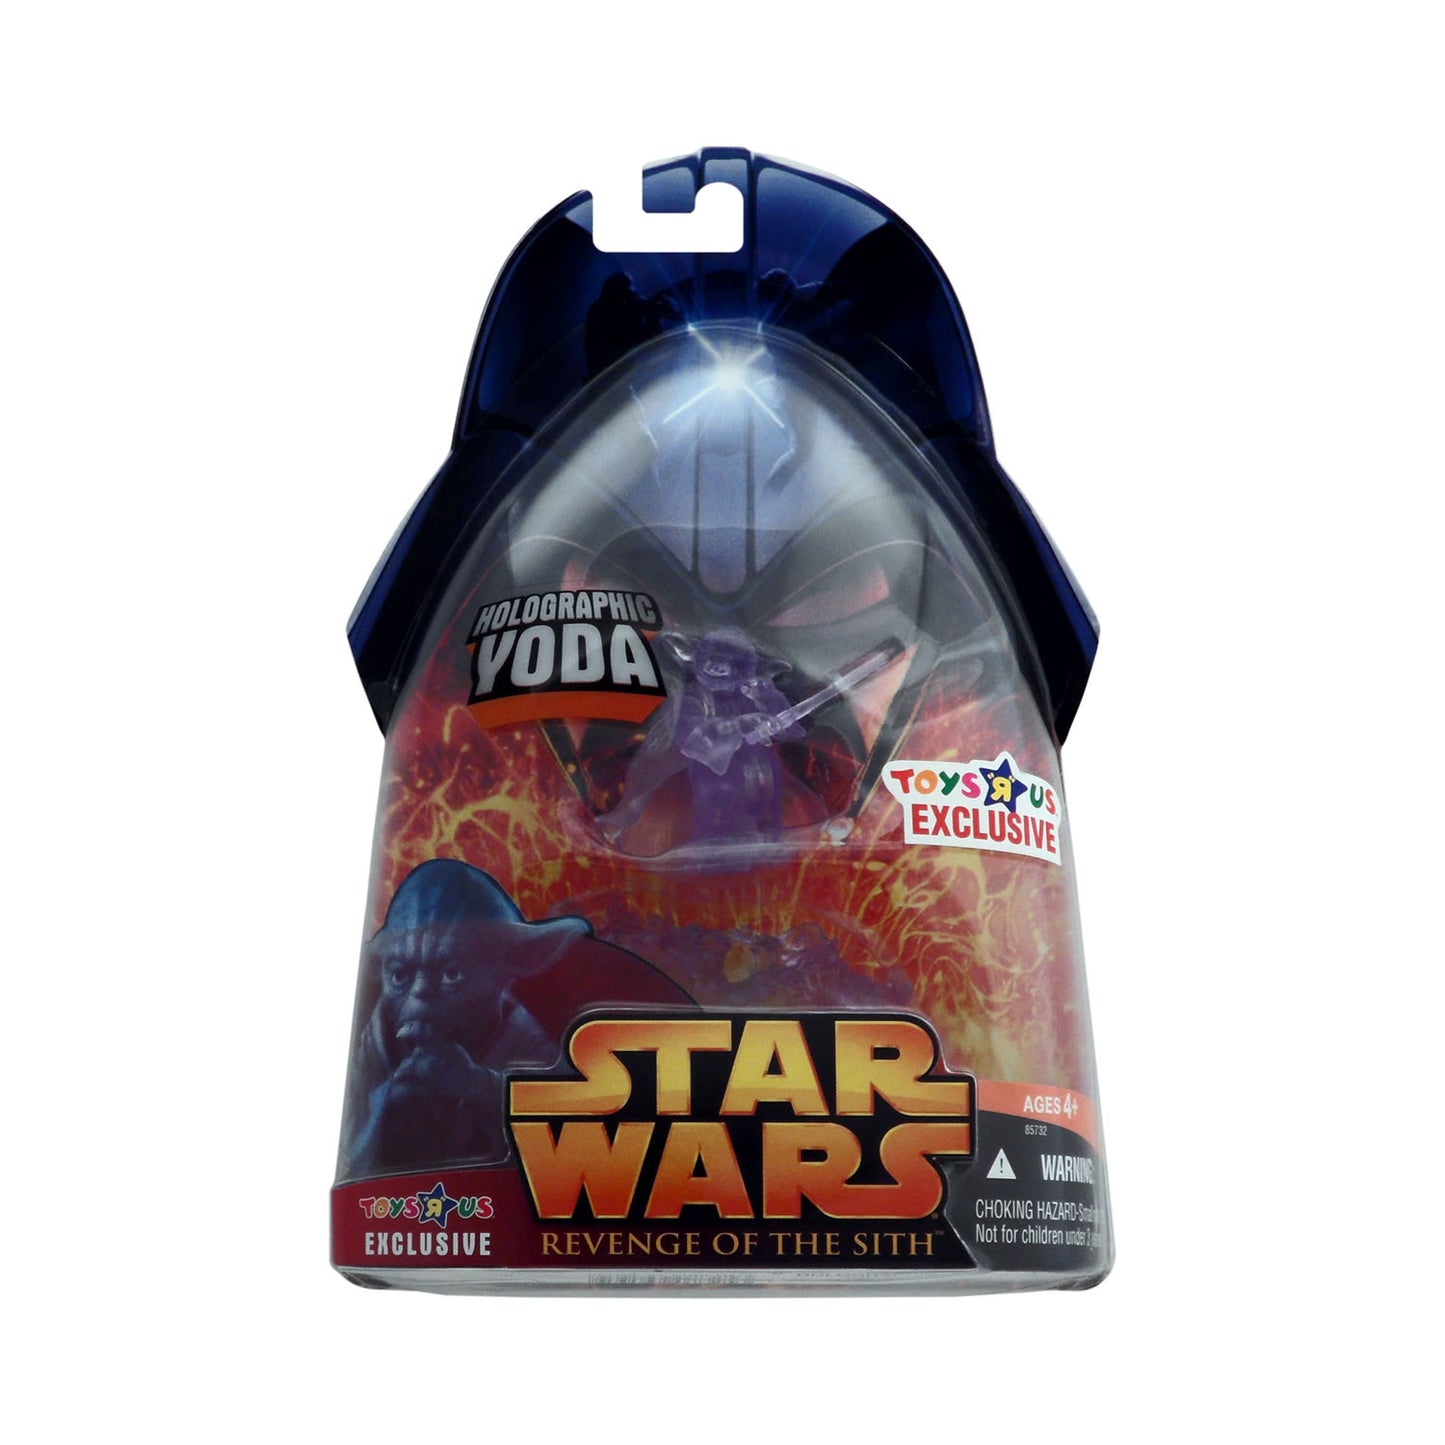 Toys "R" Us Exclusive Star Wars: Revenge of the Sith Holographic Yoda